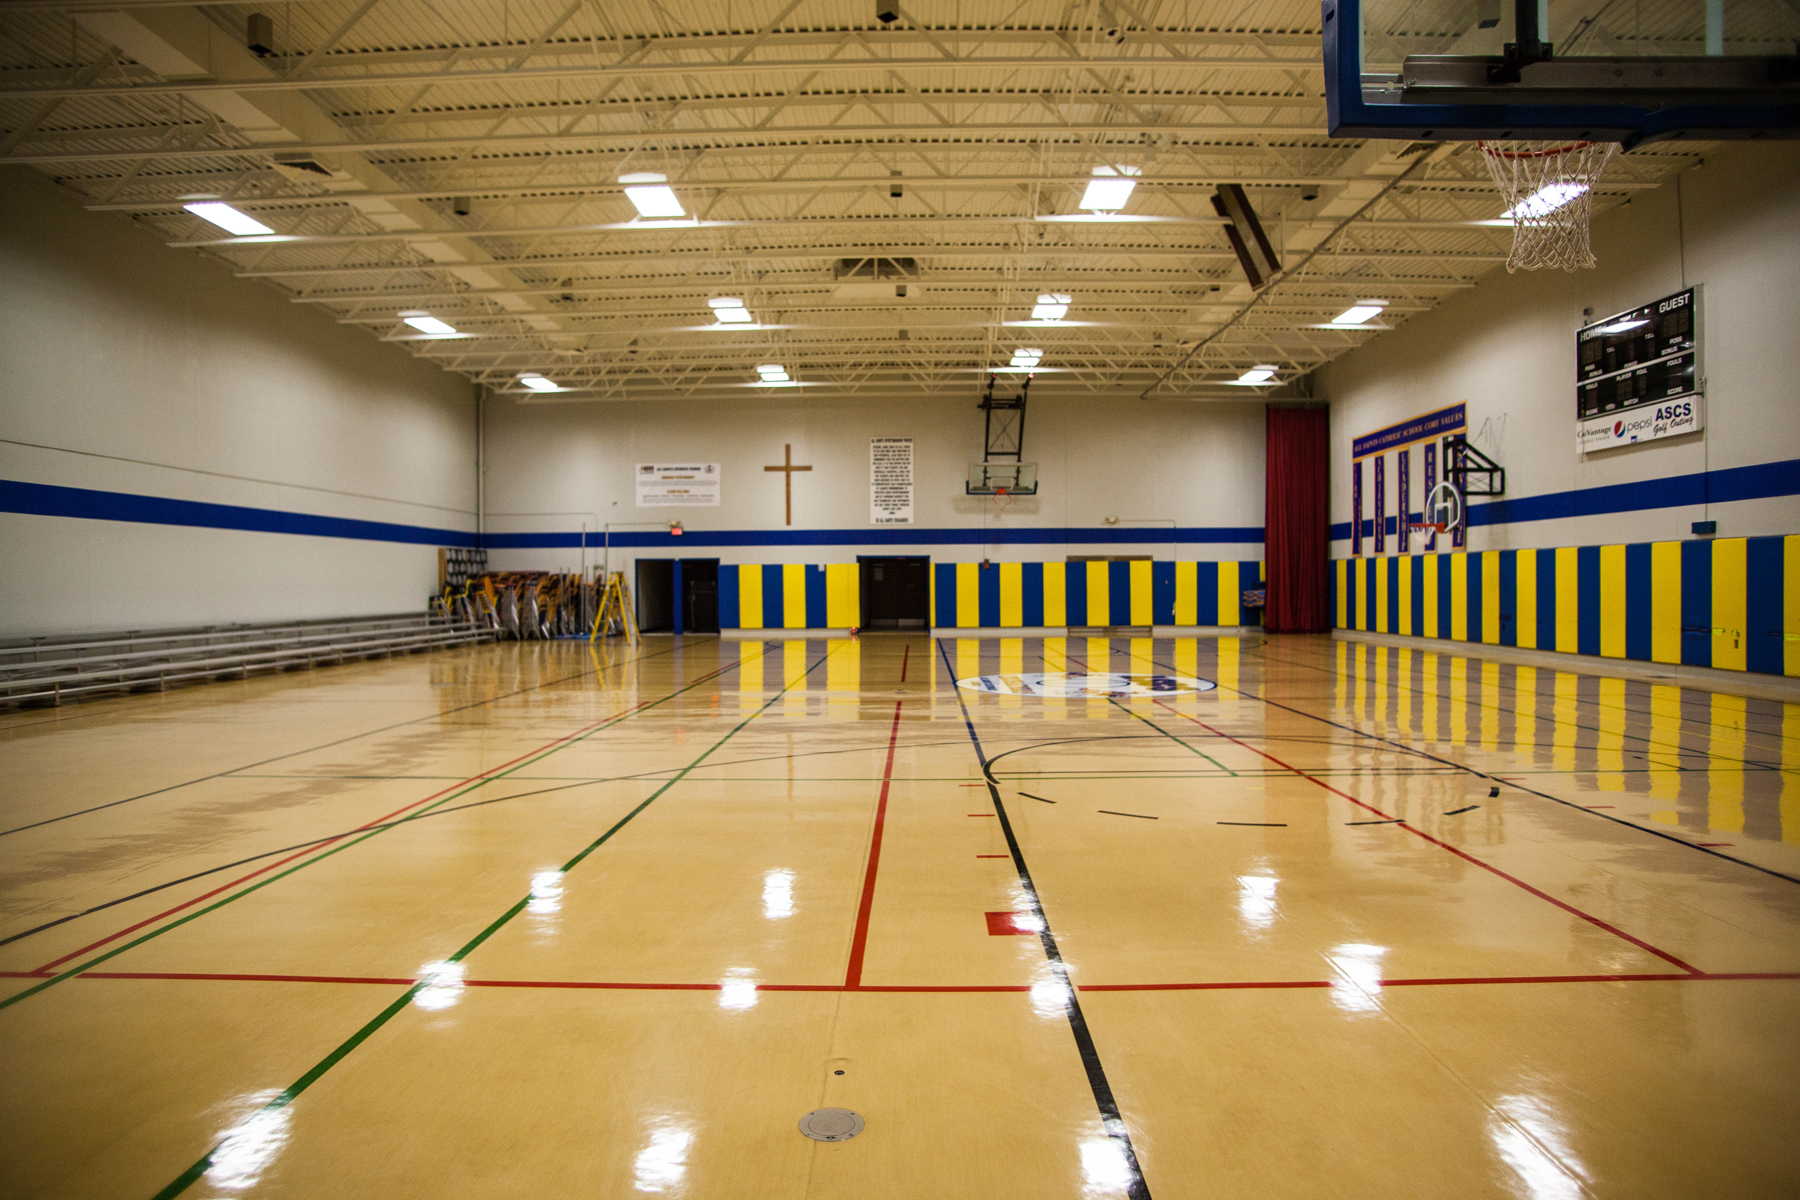 Commercial Painting Project - Basket Ball Court